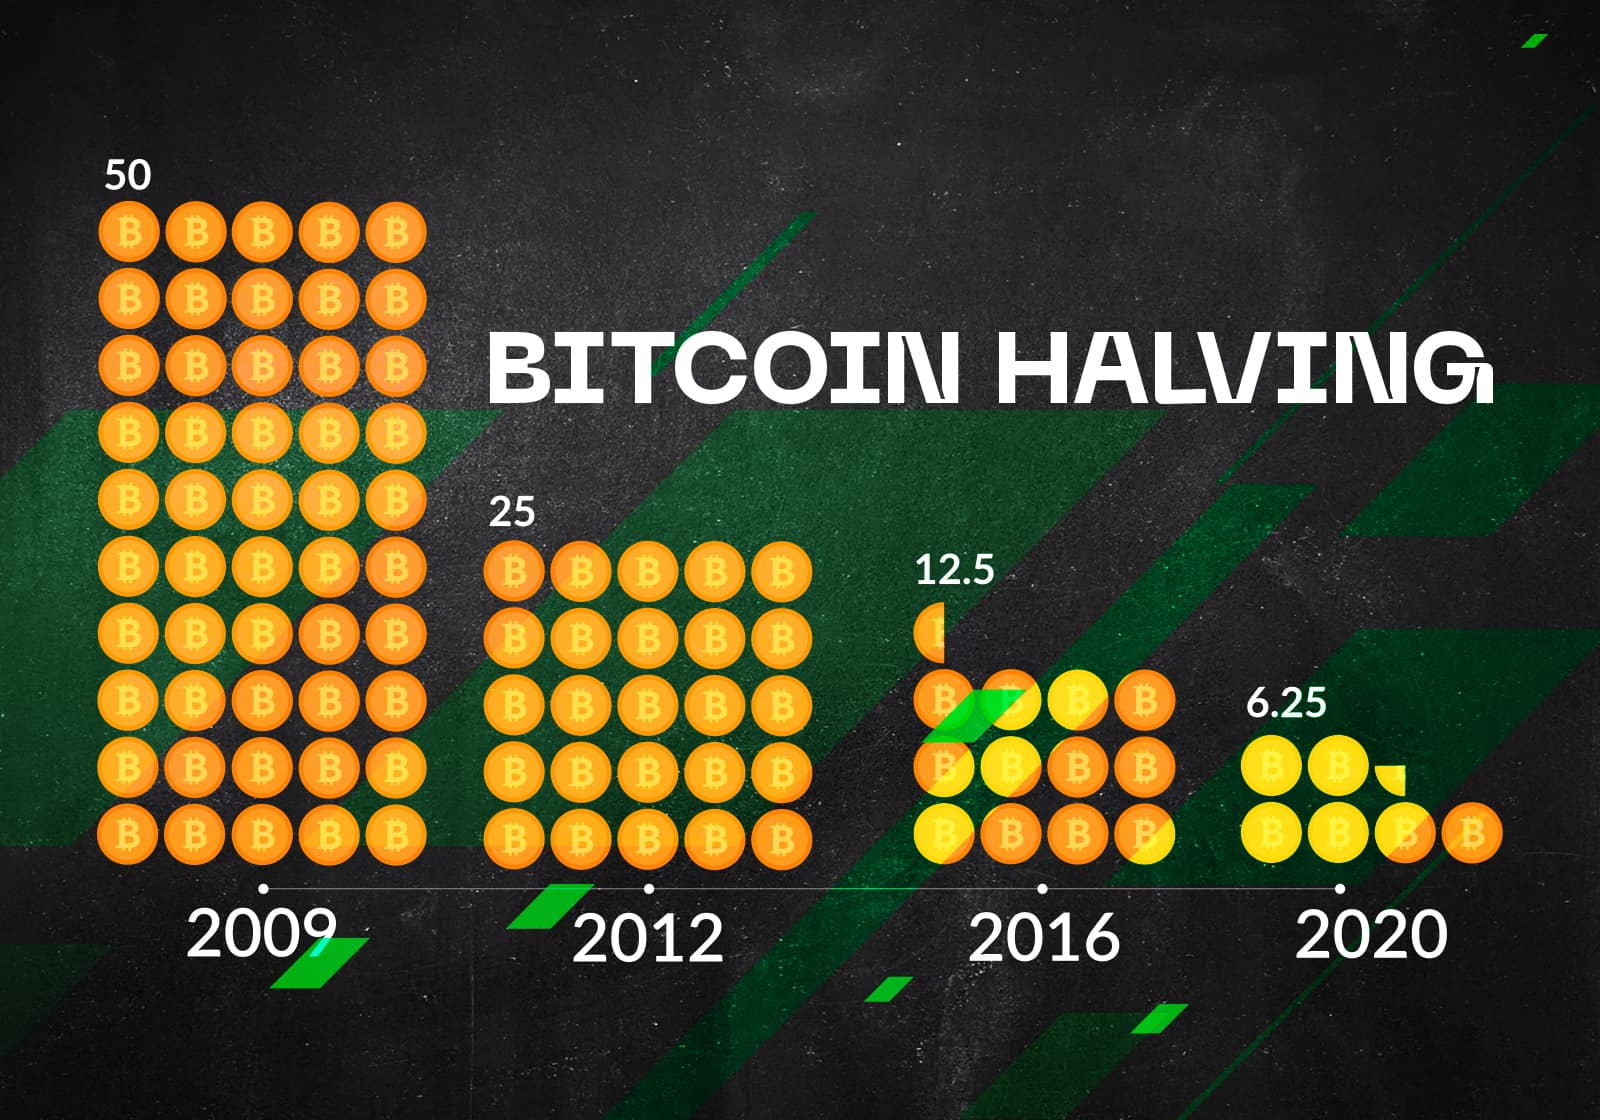 The bitcoin block reward is halved every 4 years.